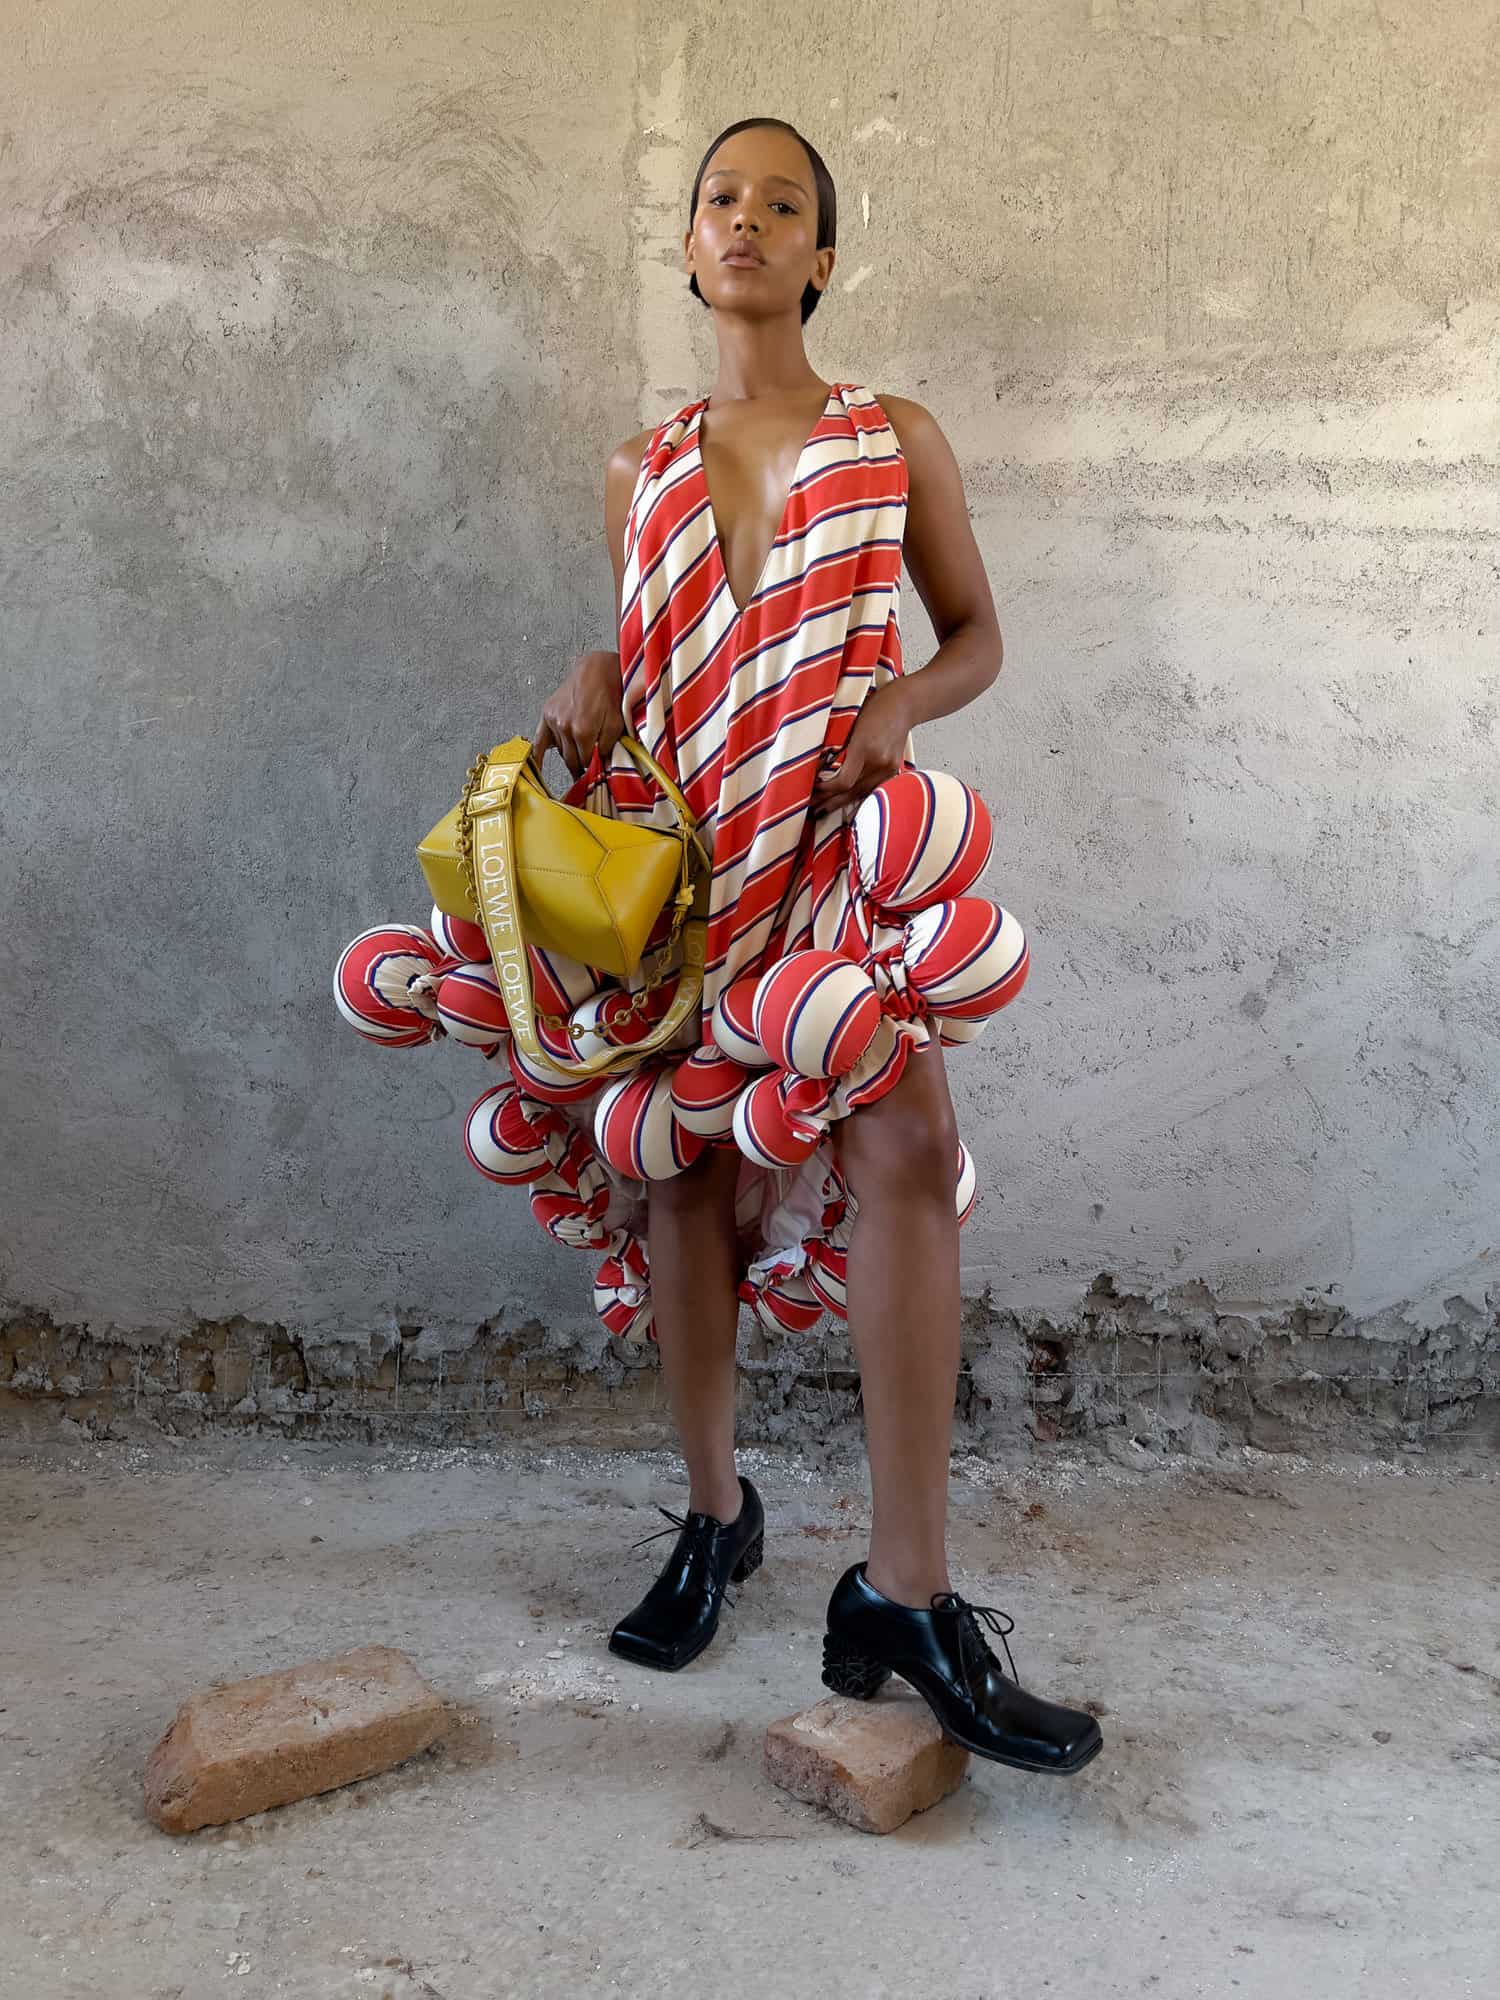 Taylor Russell for Loewe (Juergen Teller)